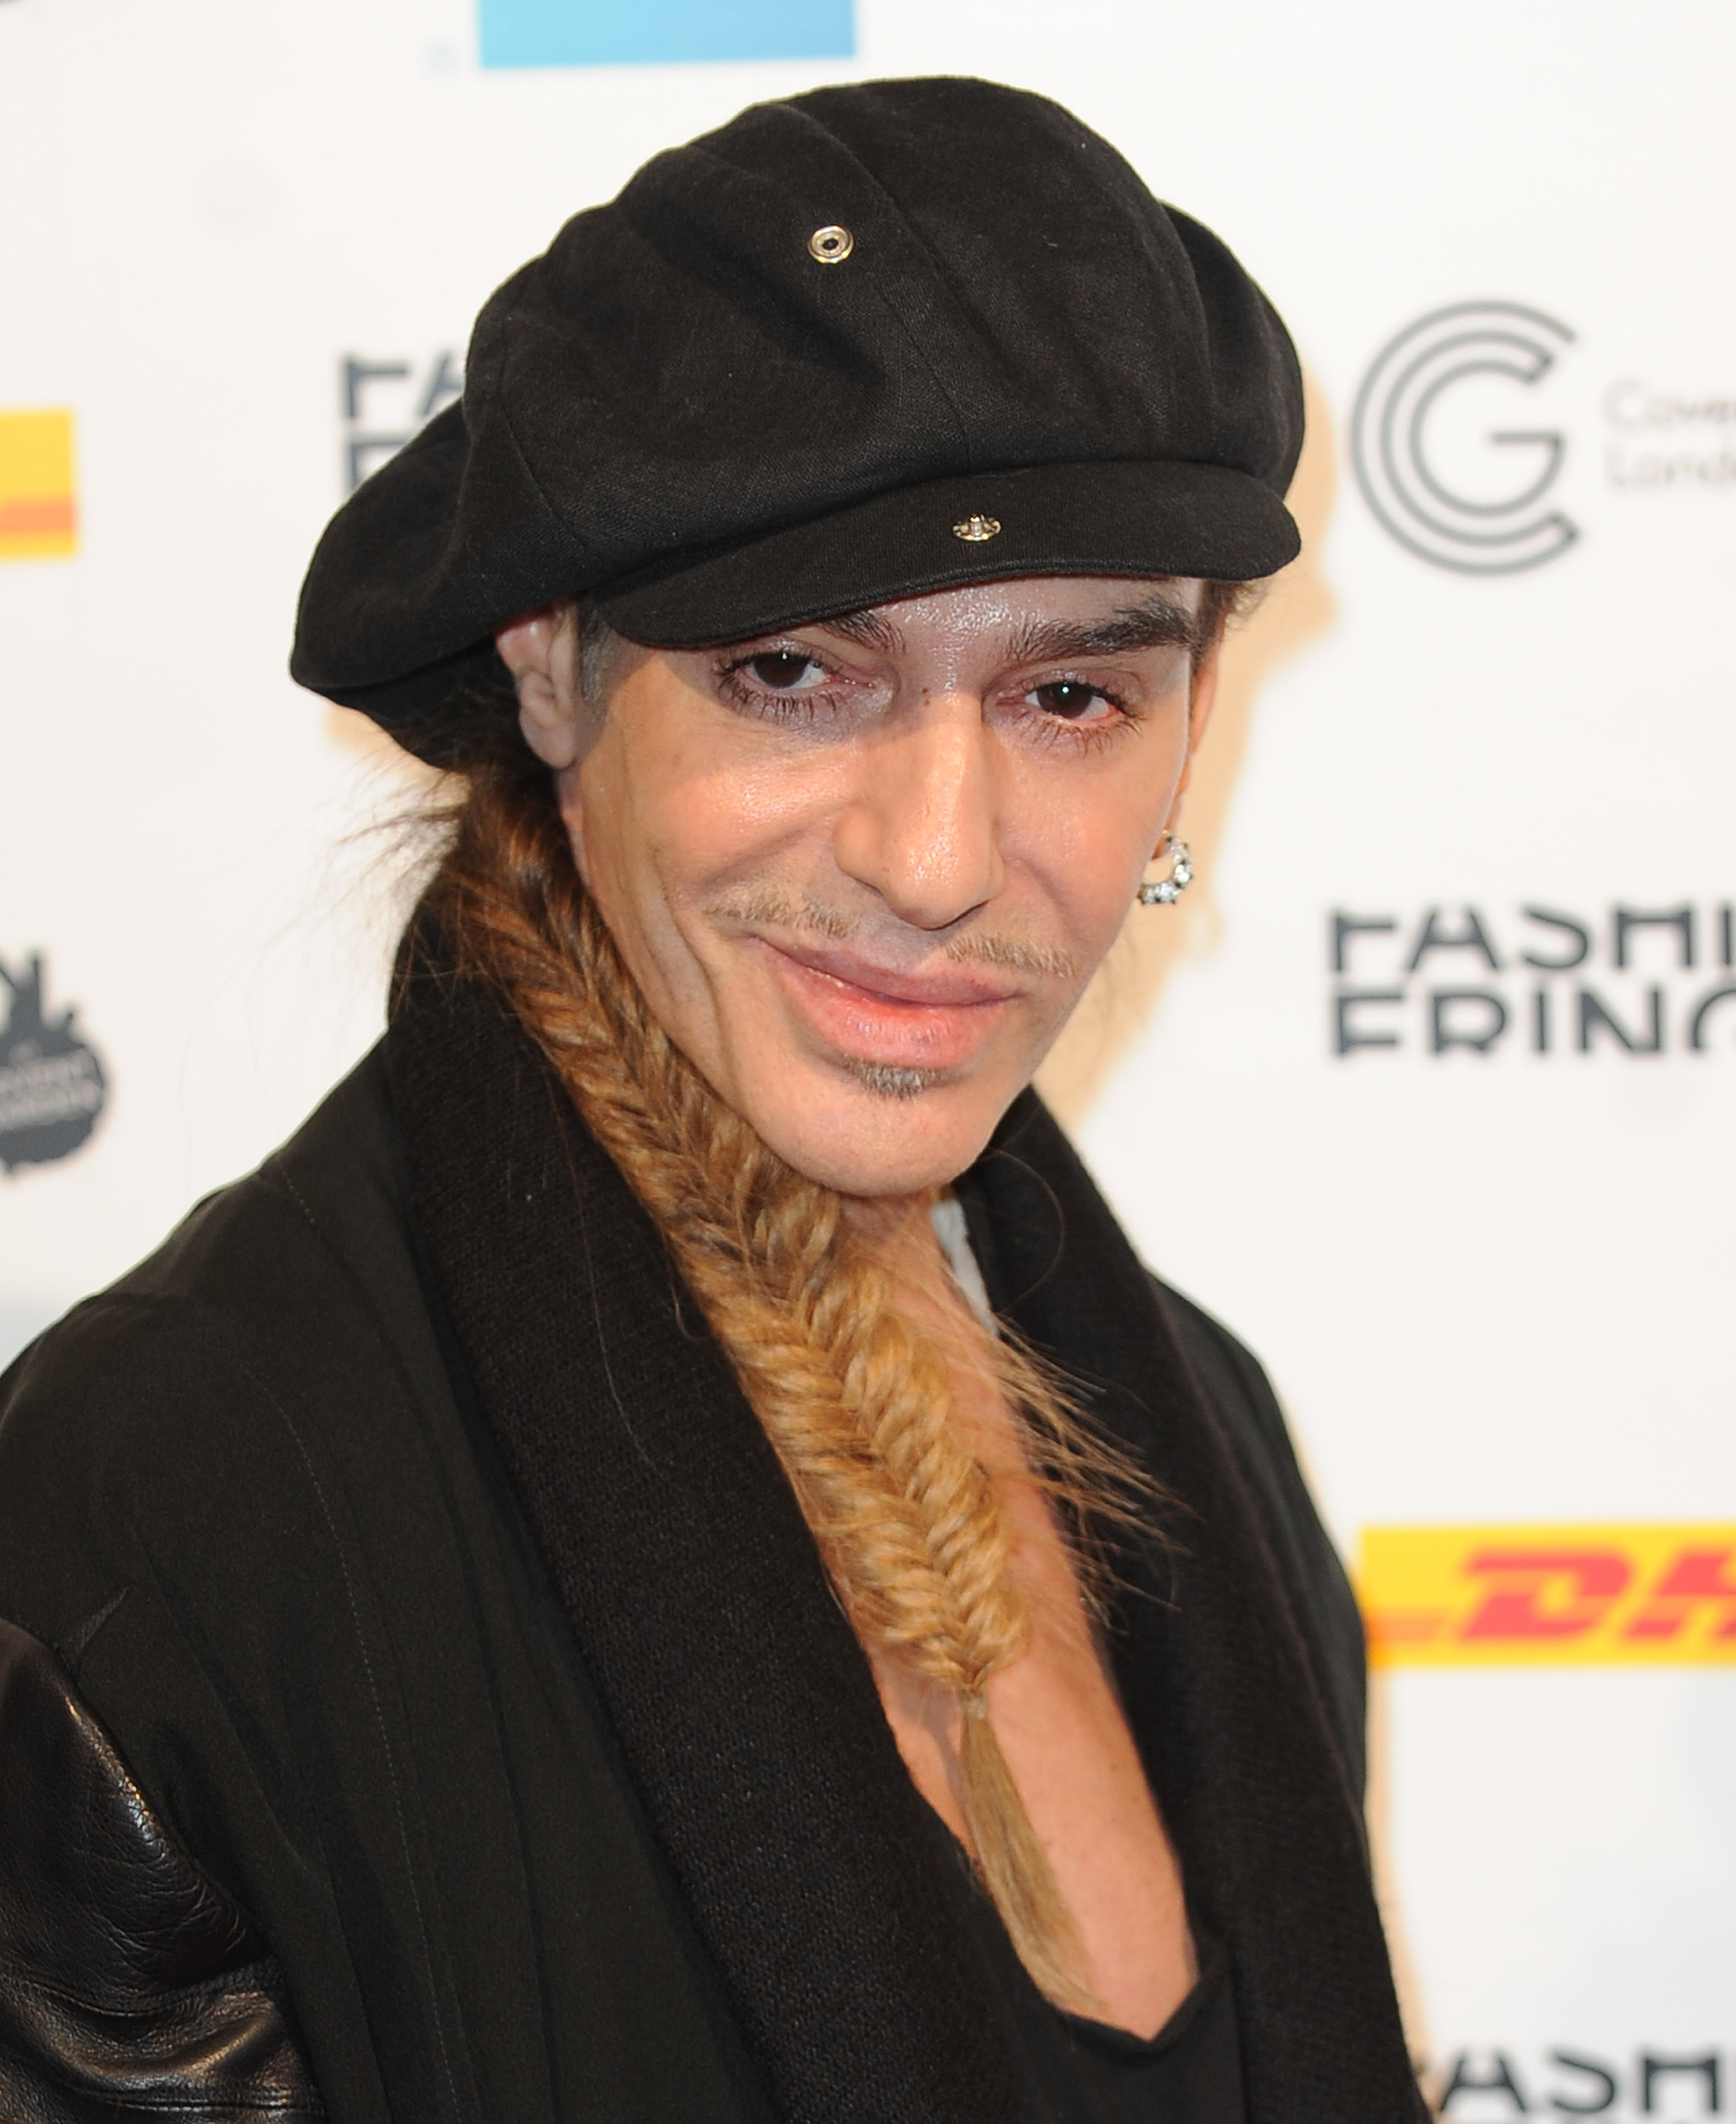 John Galliano To Teach At Parsons The New School for Design, British Vogue